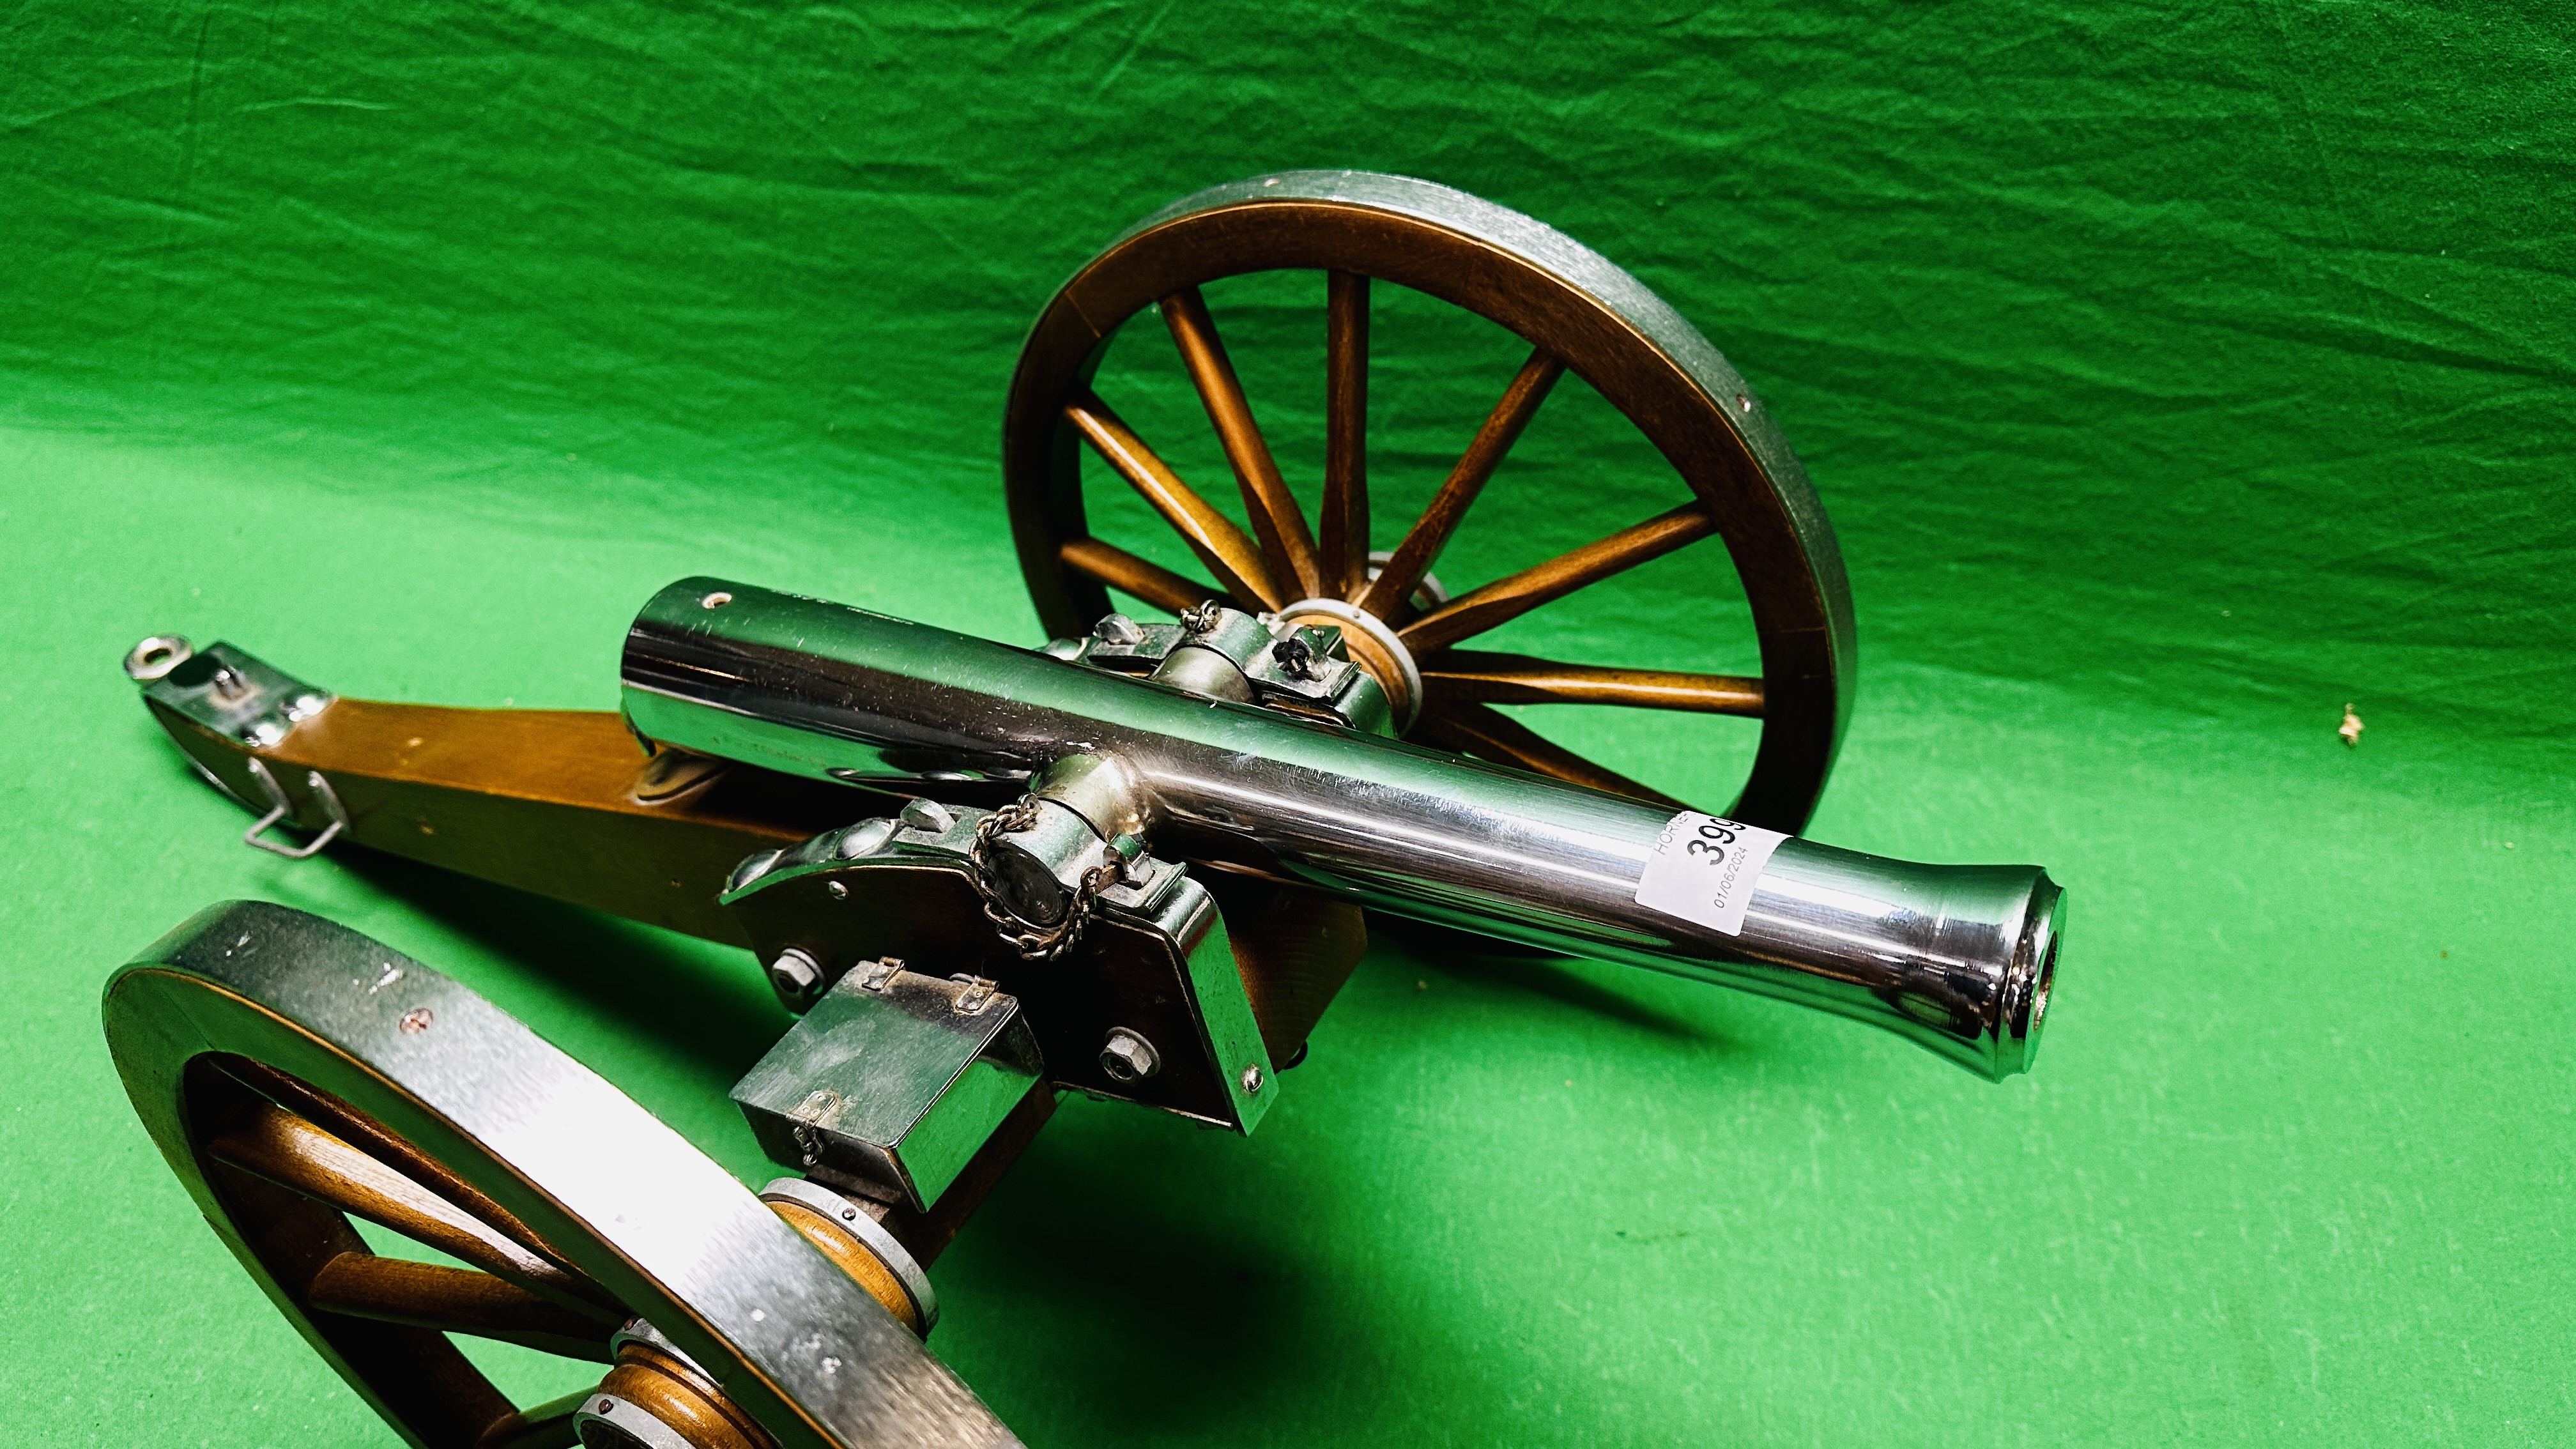 A SPANISH 75 CAL BLACK POWDER ARMAS GIL CANNON 14" BARREL MOUNTED ON A CARRIAGE. - Image 3 of 15